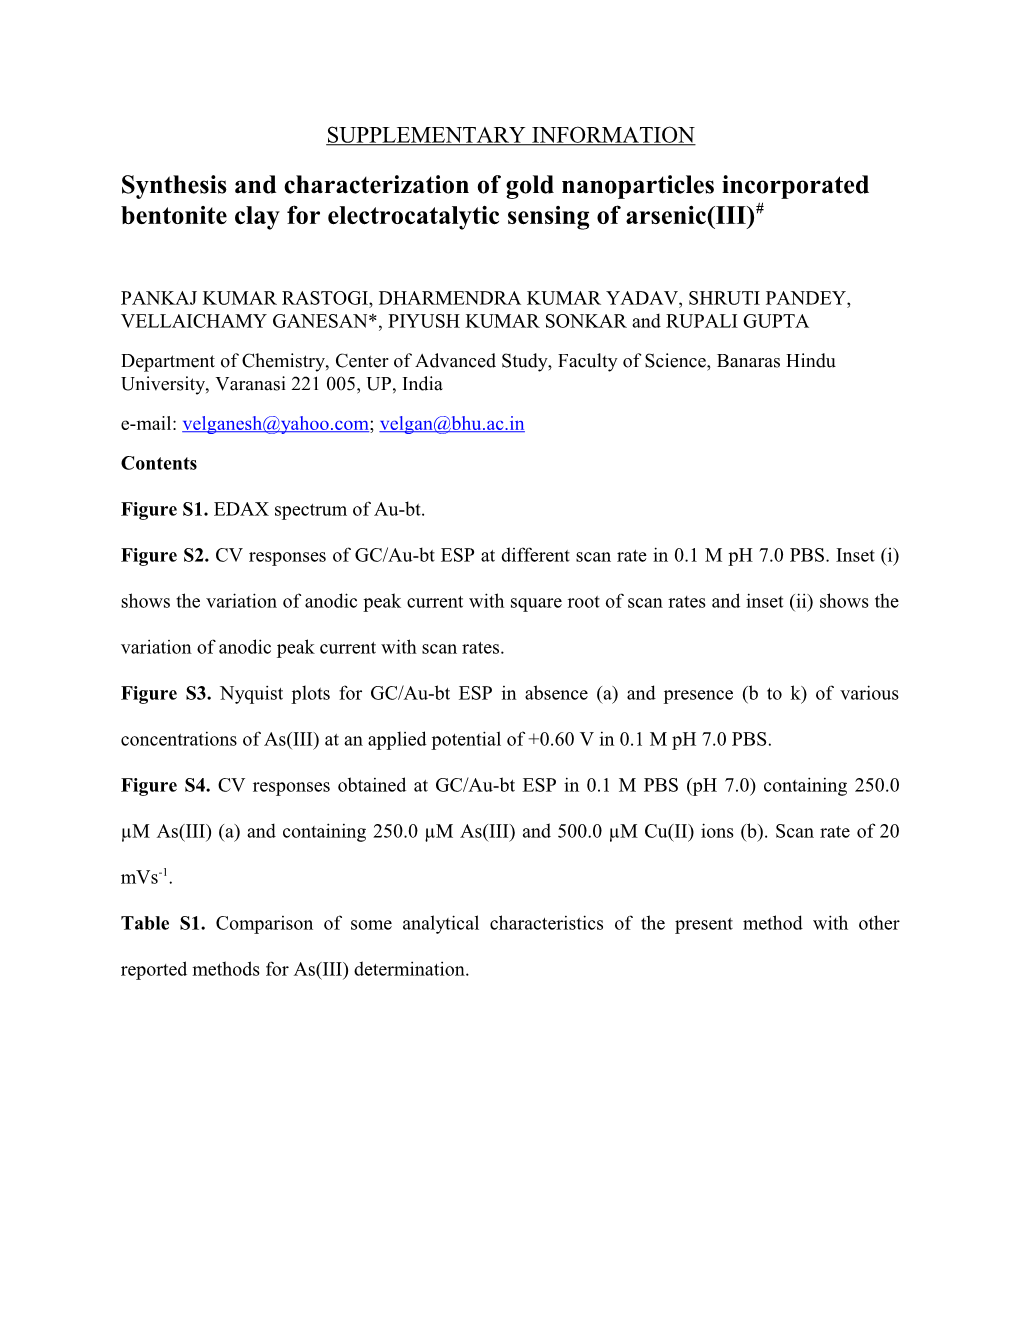 Synthesis and Characterization of Gold Nanoparticles Incorporated Bentonite Clay For